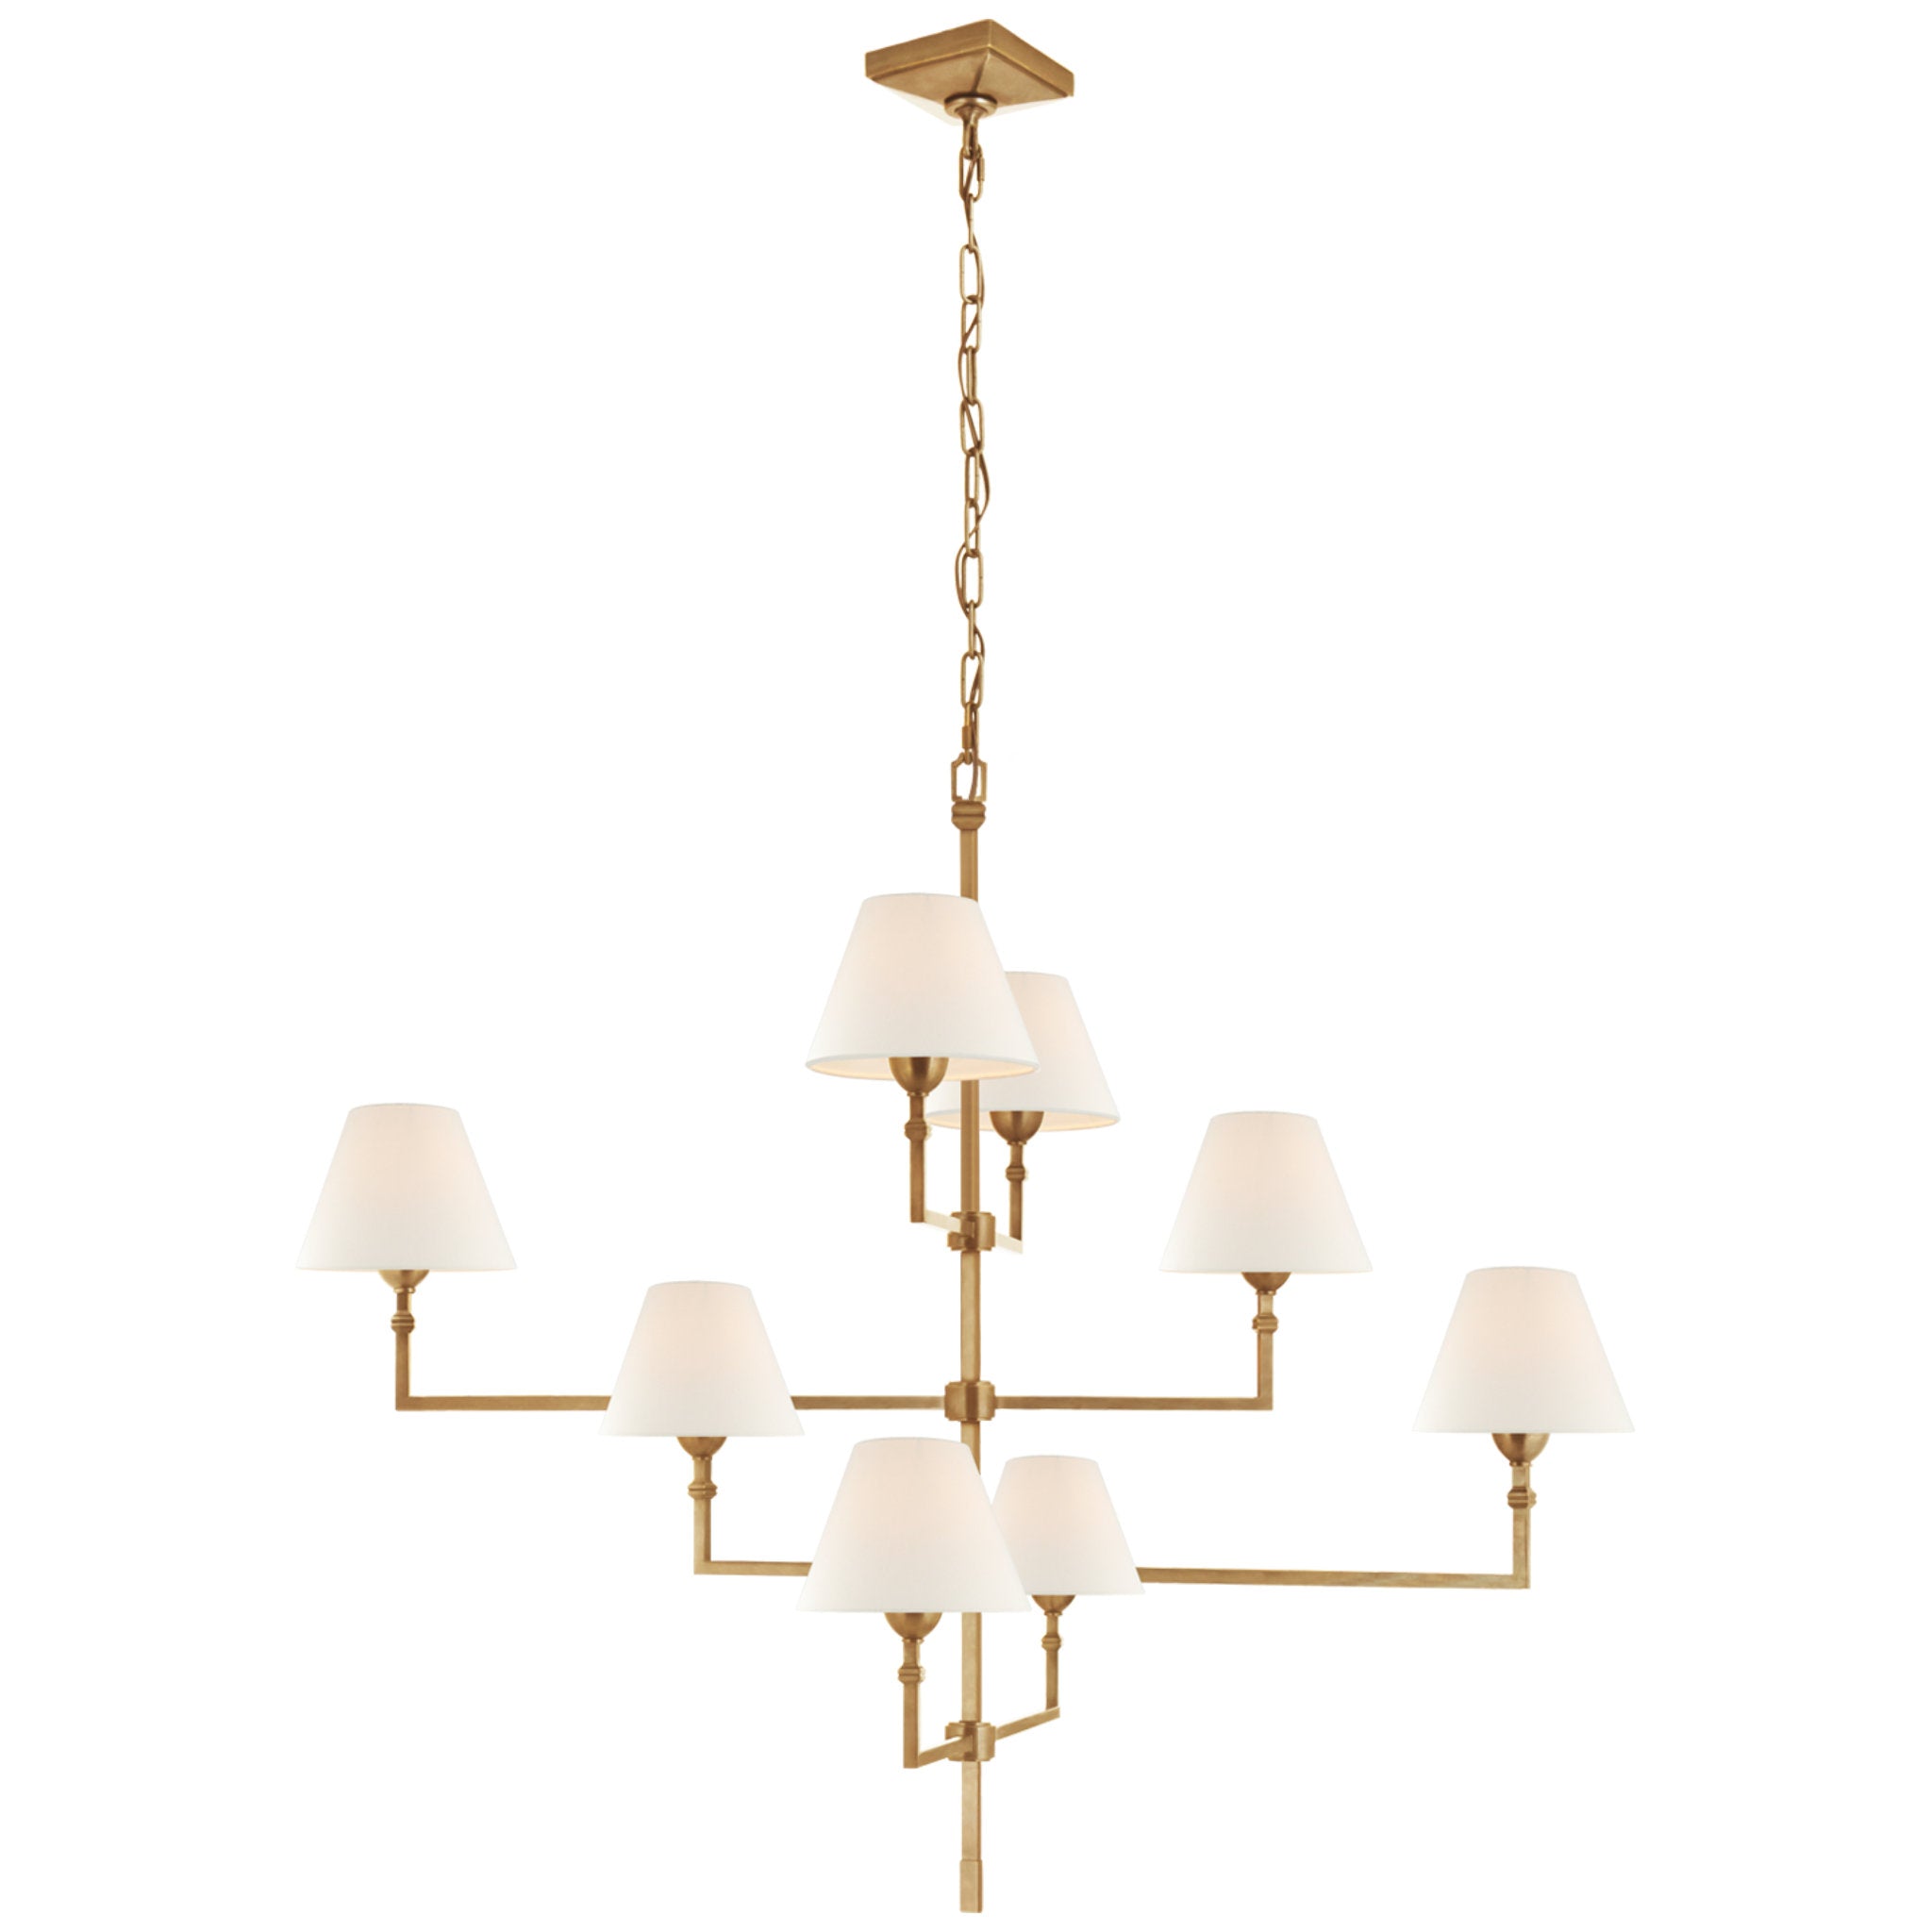 Alexa Hampton Jane Large Offset Chandelier in Hand-Rubbed Antique Brass with Linen Shades